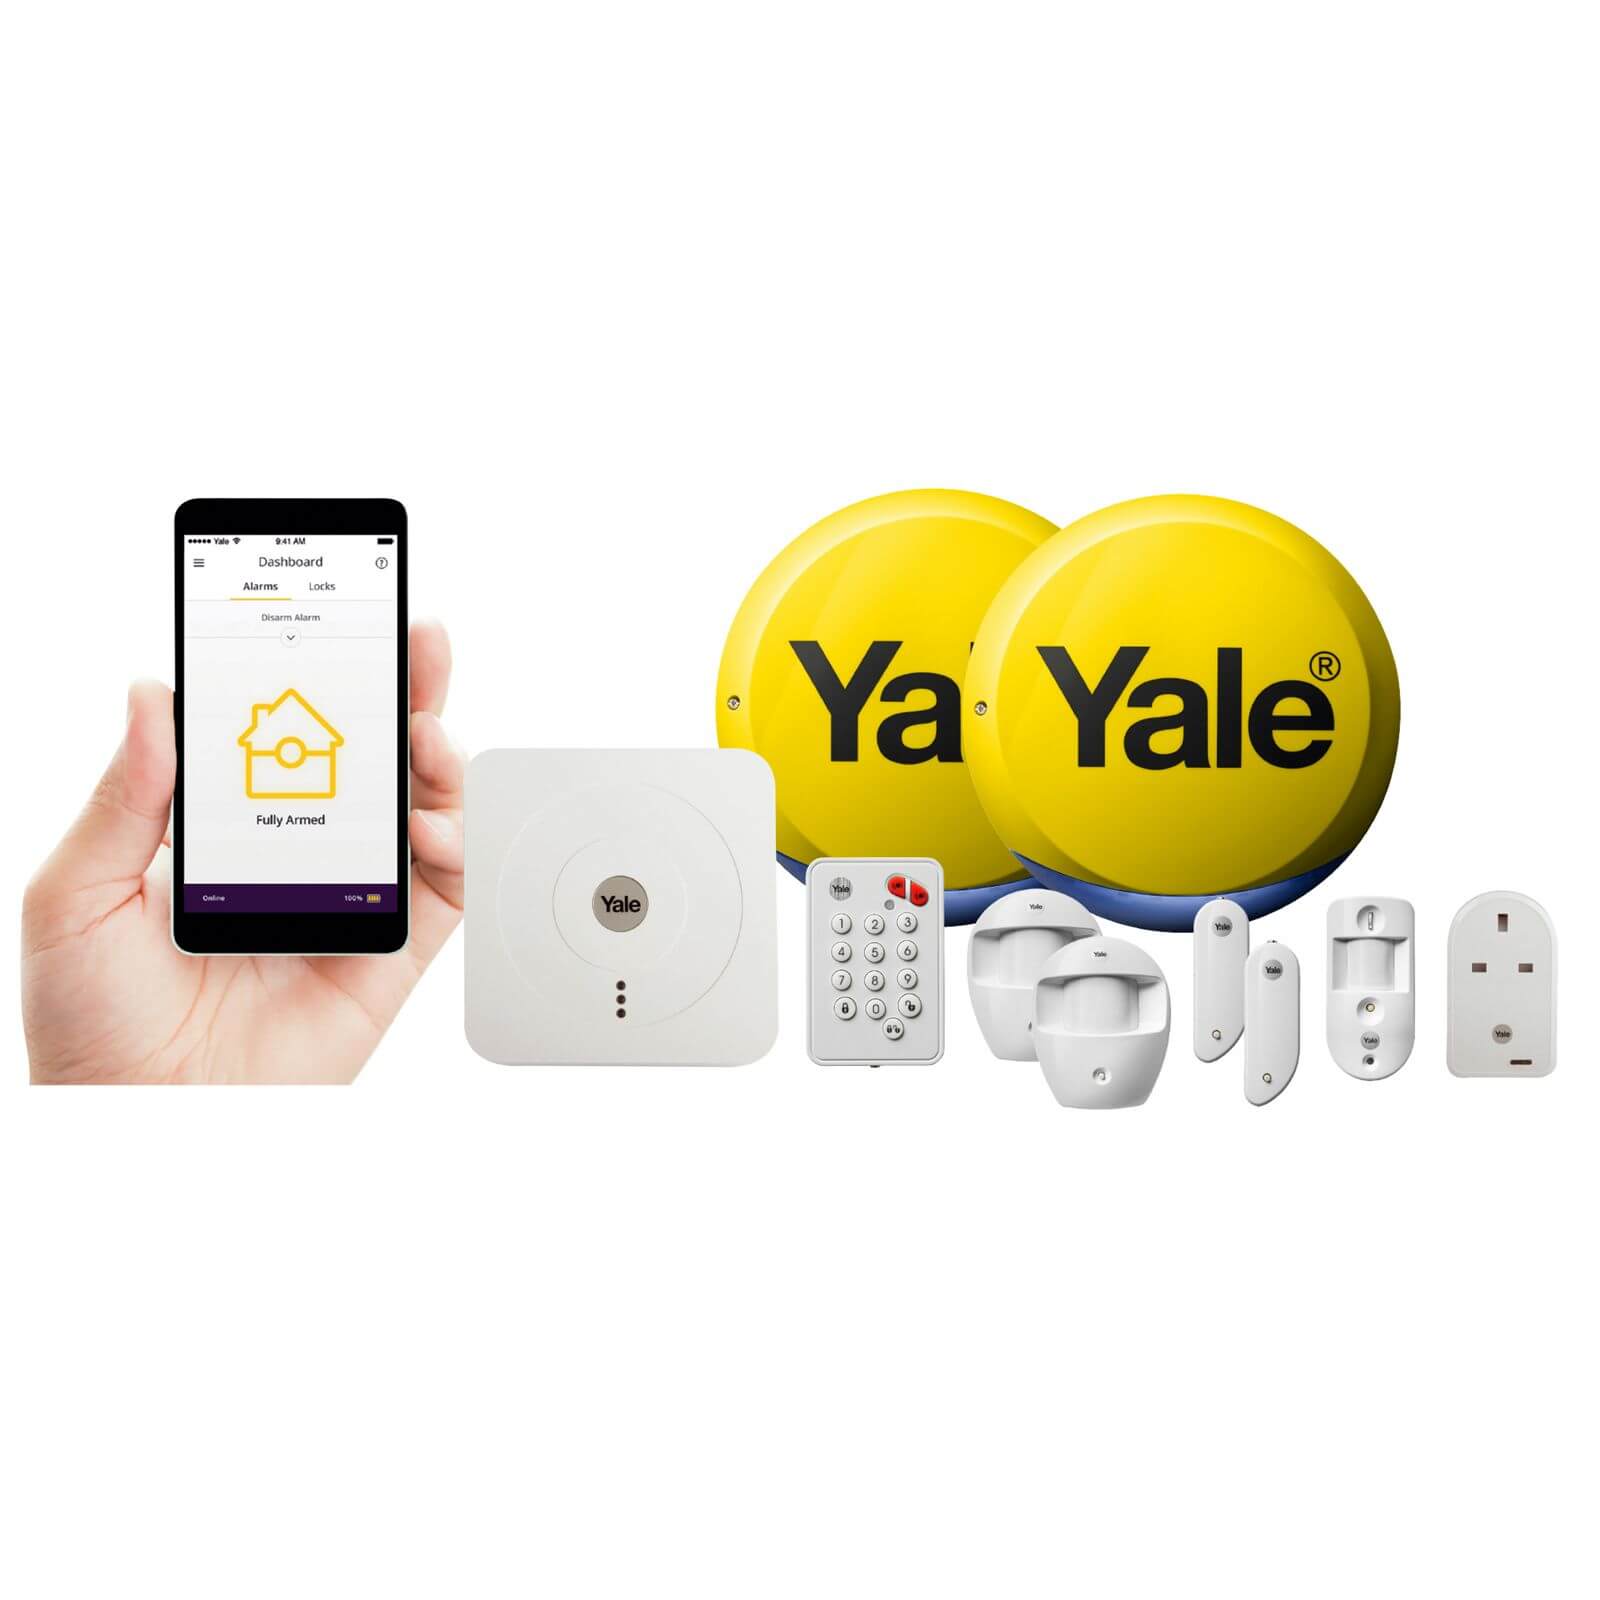 Yale Smart Alarm View and Control Kit